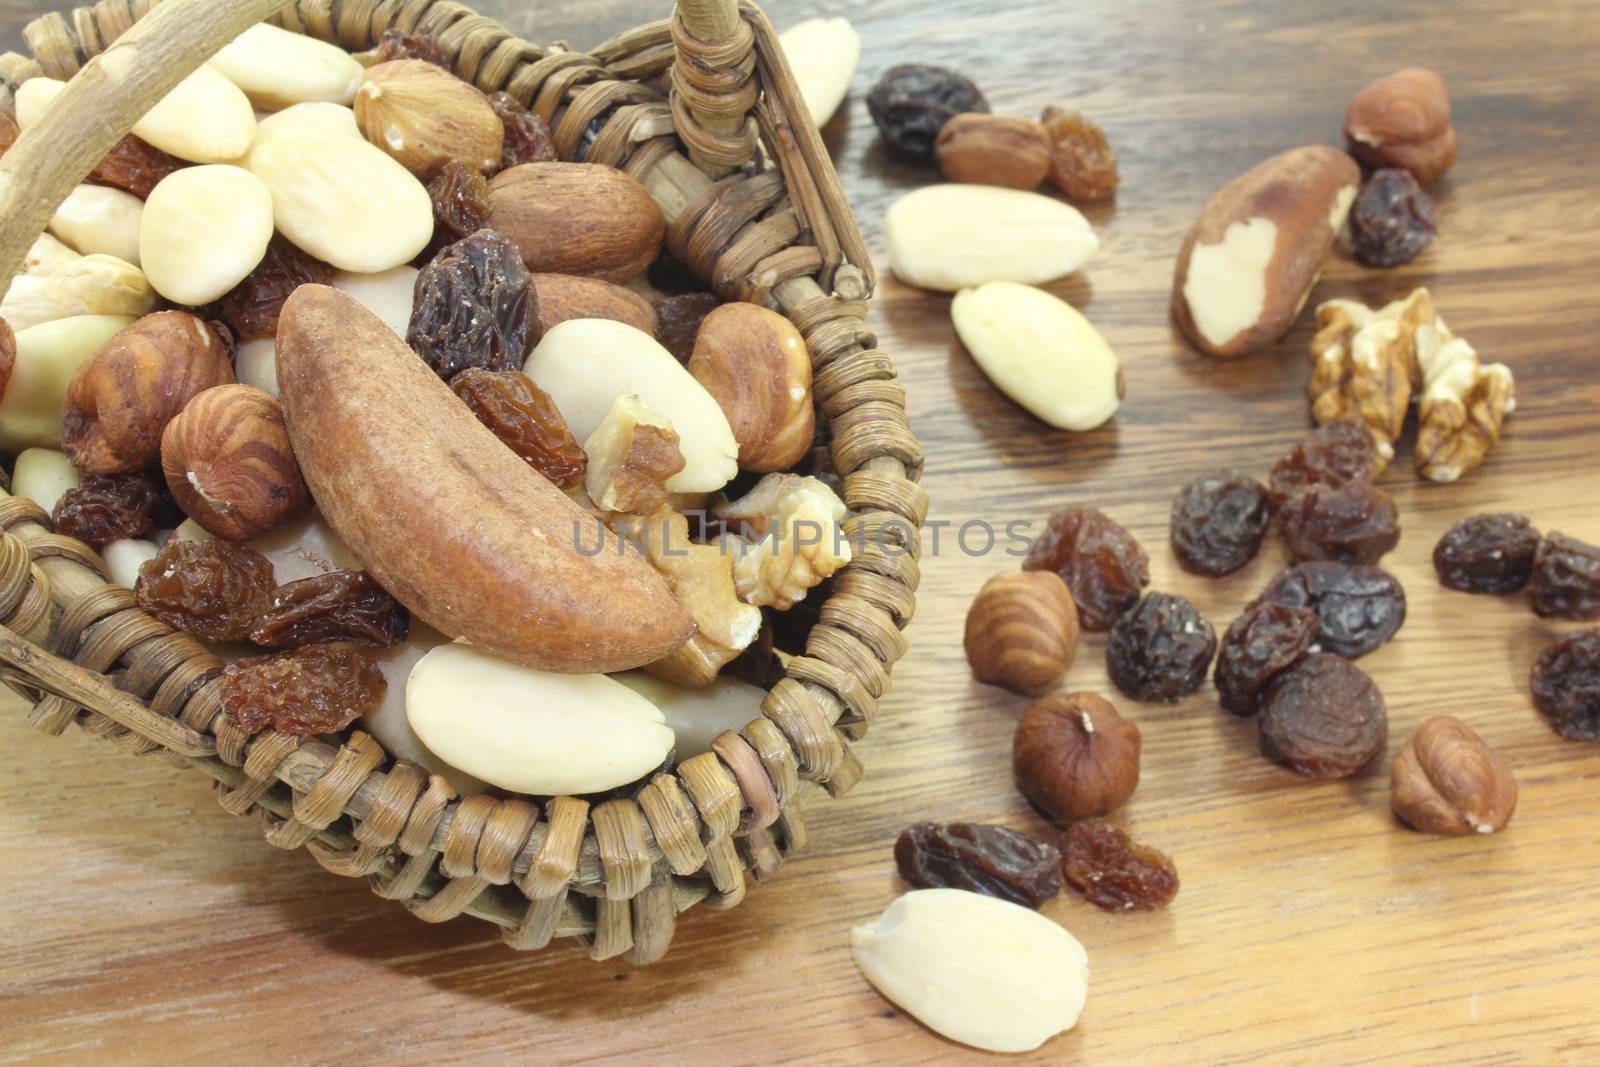 Mixed nuts by discovery